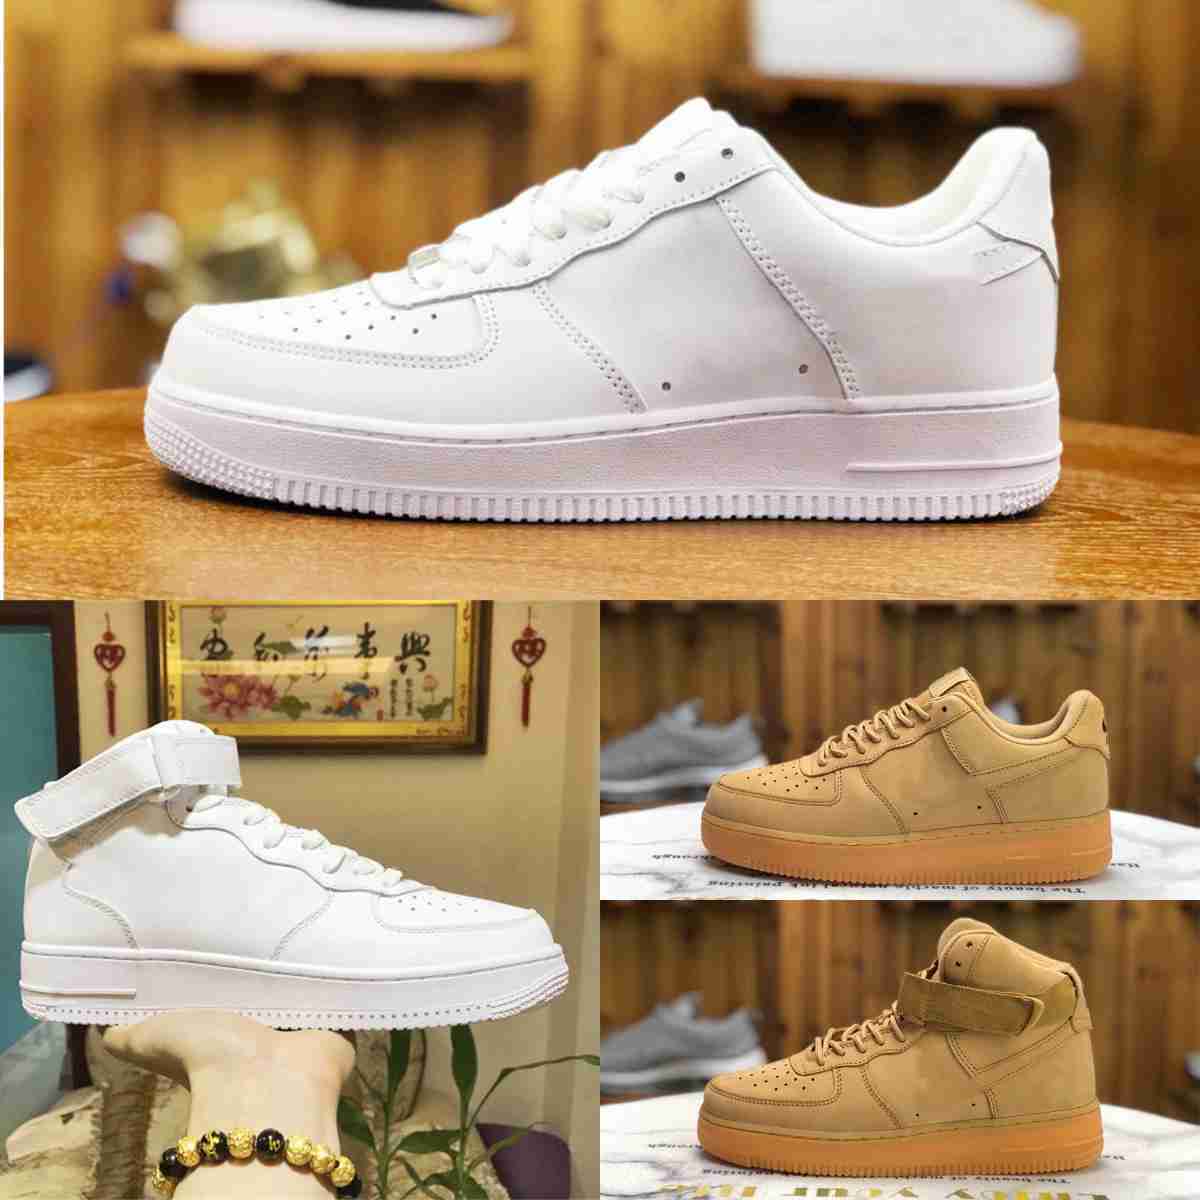 

AirforCes 1 Classic Running Shoes One Skateboarding Retro Triple White Black Wheat Airs High Low Cut Trainers ForCes 1s 07 Original Skate Sports Outdoor Sneakers, Please contact us